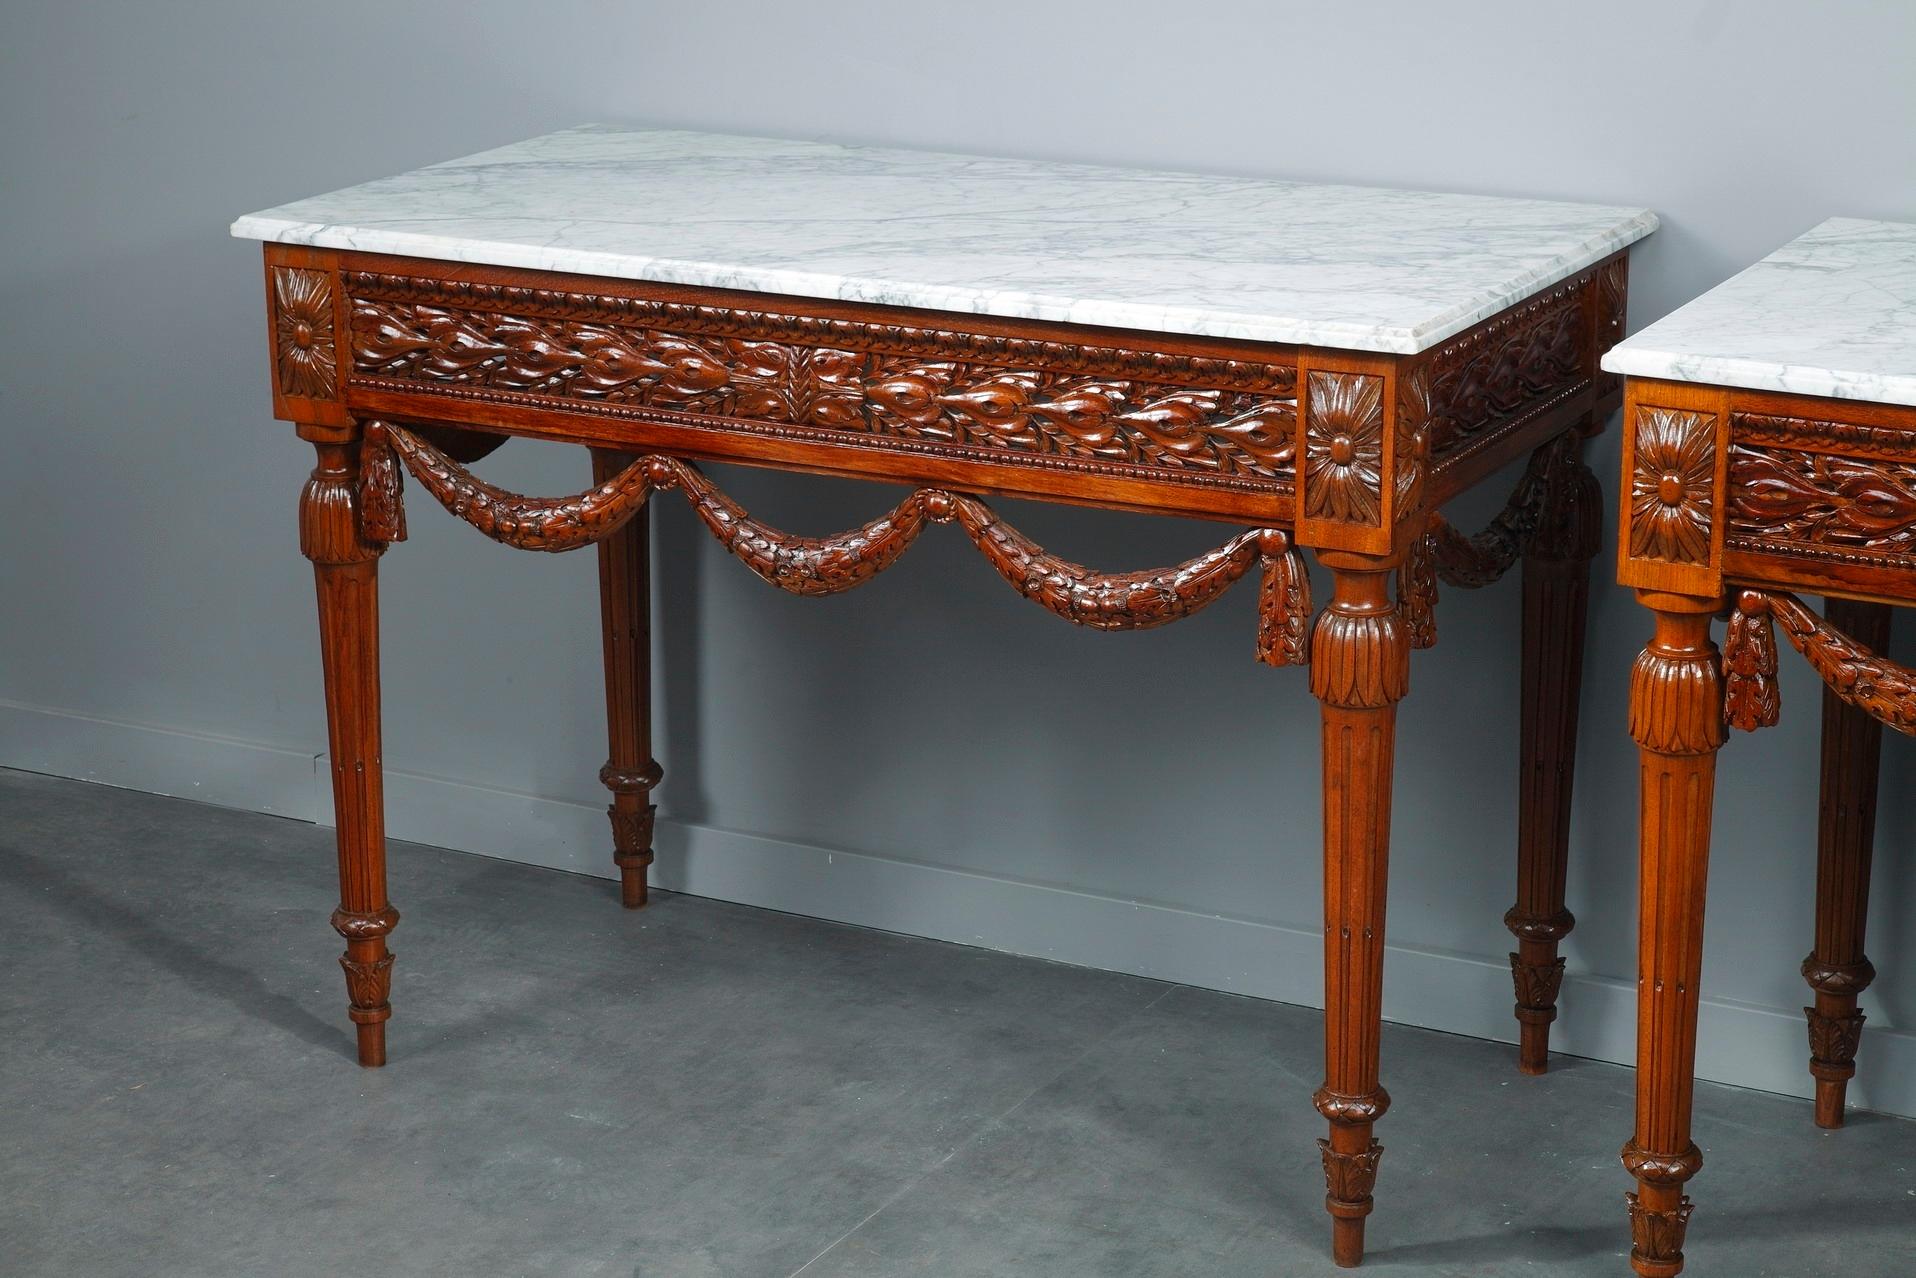 Pair of Louis XVI-style consoles tables crafted of walnut with white marble top. Crafted with a meticulous attention to detail, these tables epitomize the best elements of Louis XVI refined style: openwork foliage, garland of oak leaves and pearls.